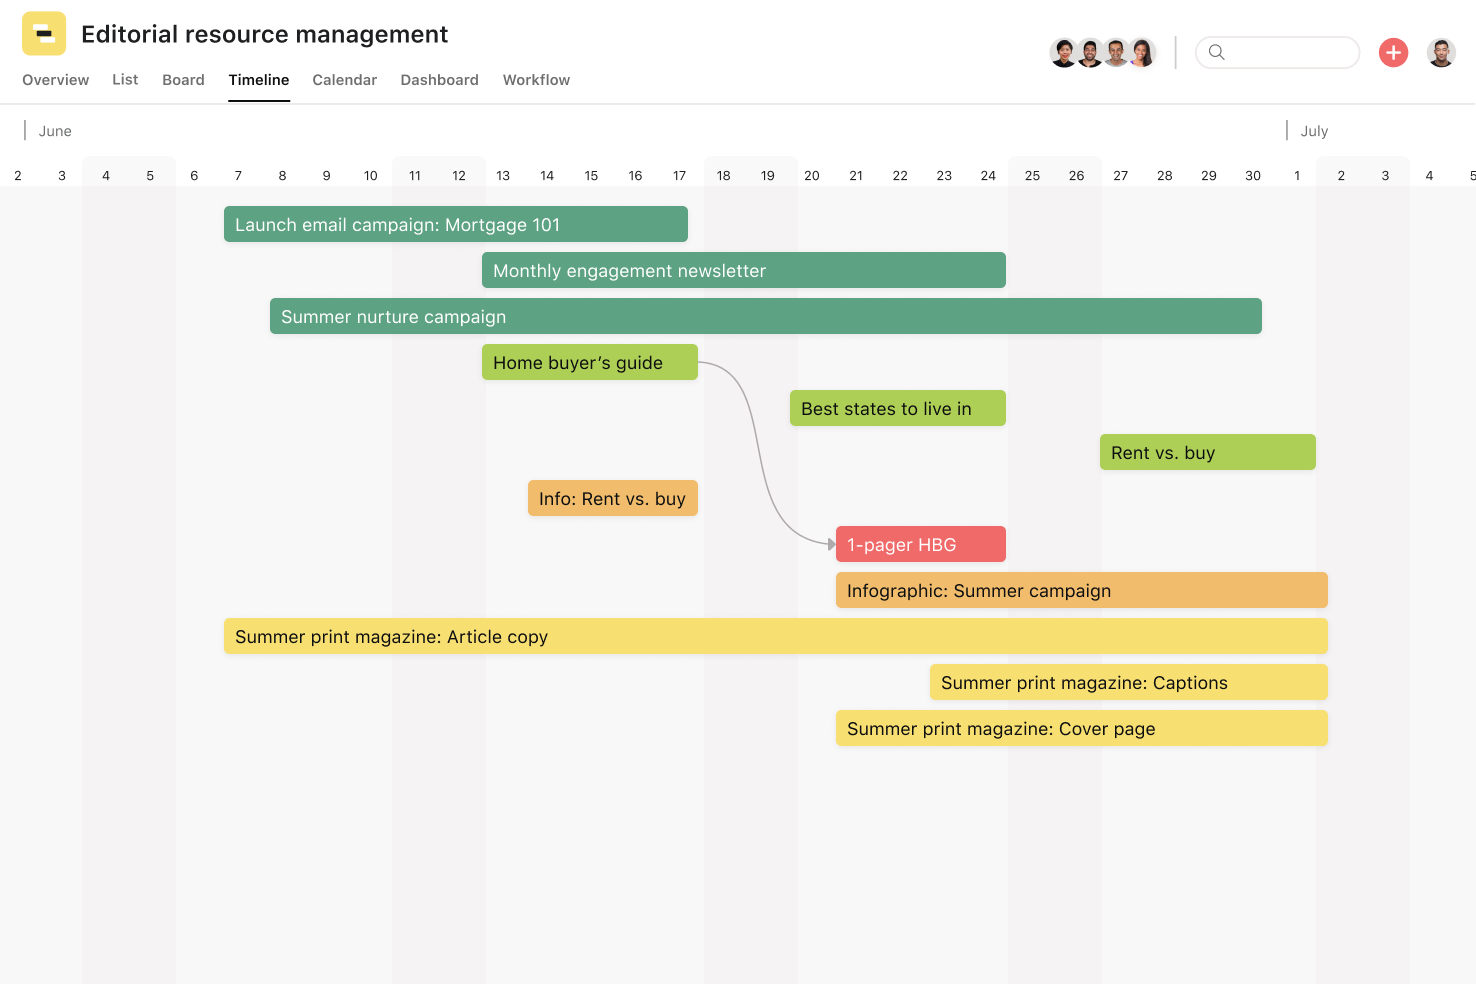 [Product ui] Editorial resource management (timeline)